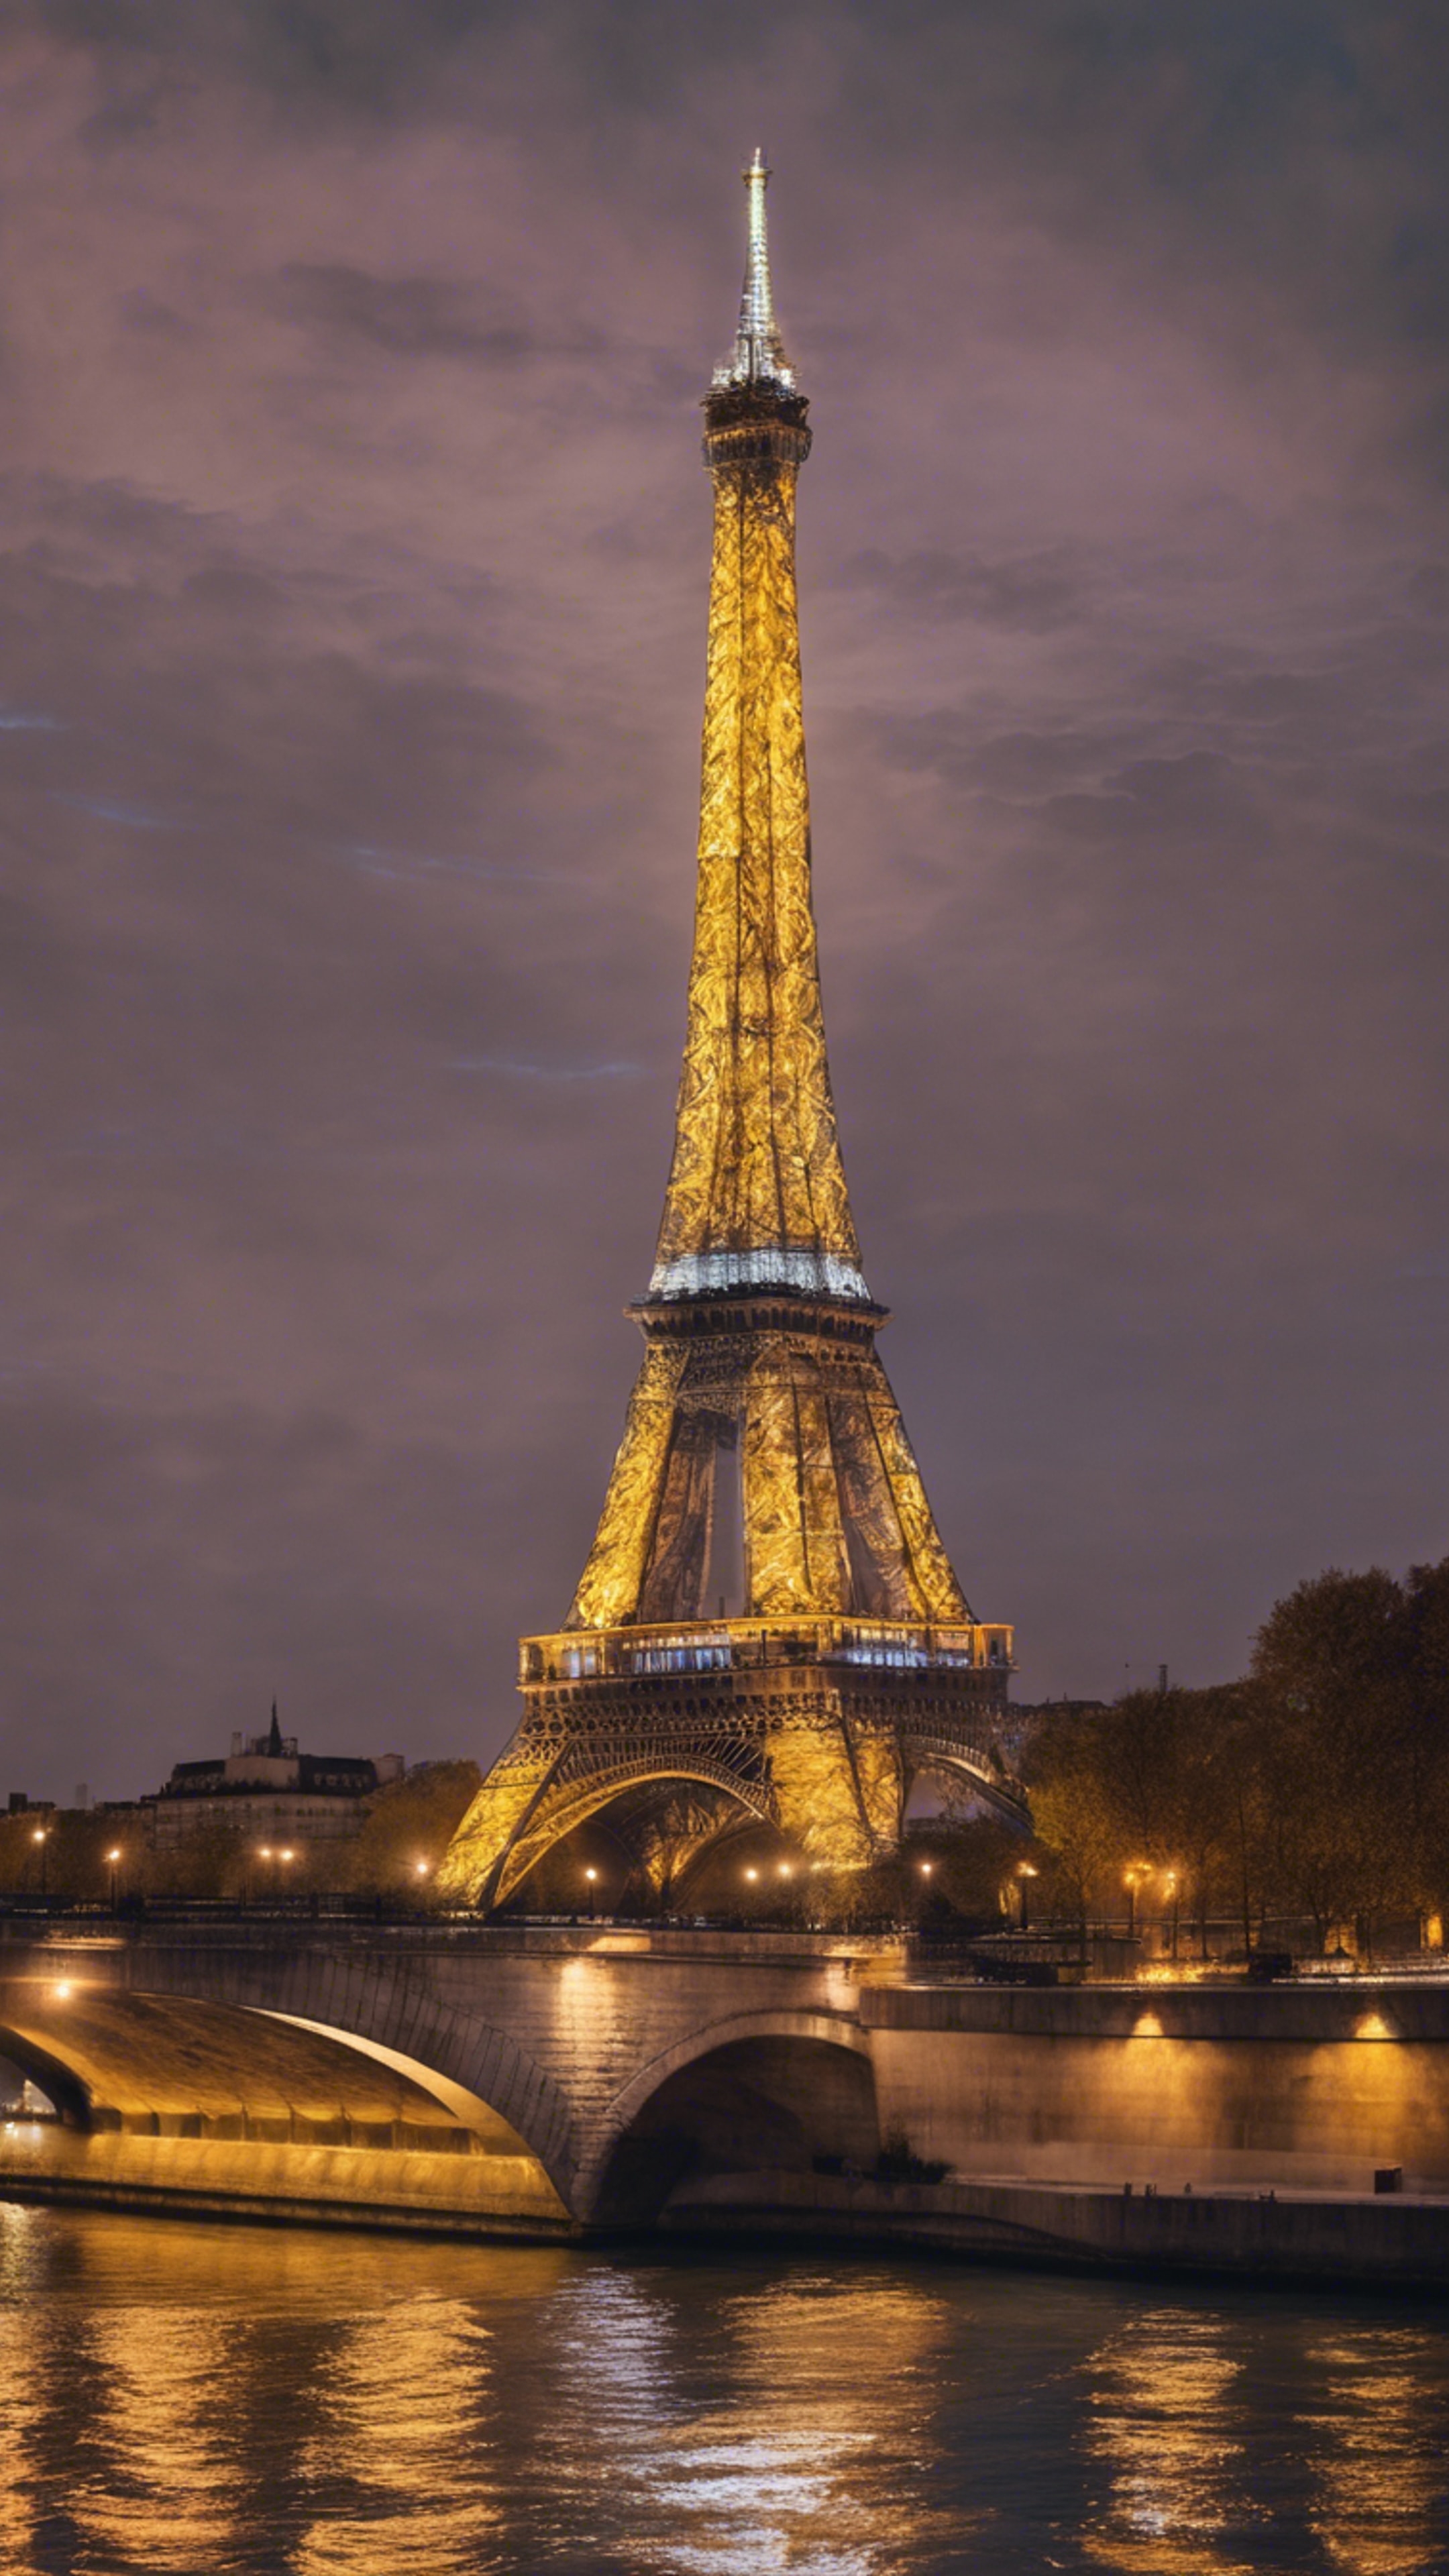 Eiffel tower illuminated against the Paris skyline at night, reflecting in the smooth waters of the river Seine. Tapetai[bfd7e83086d14adeb14c]